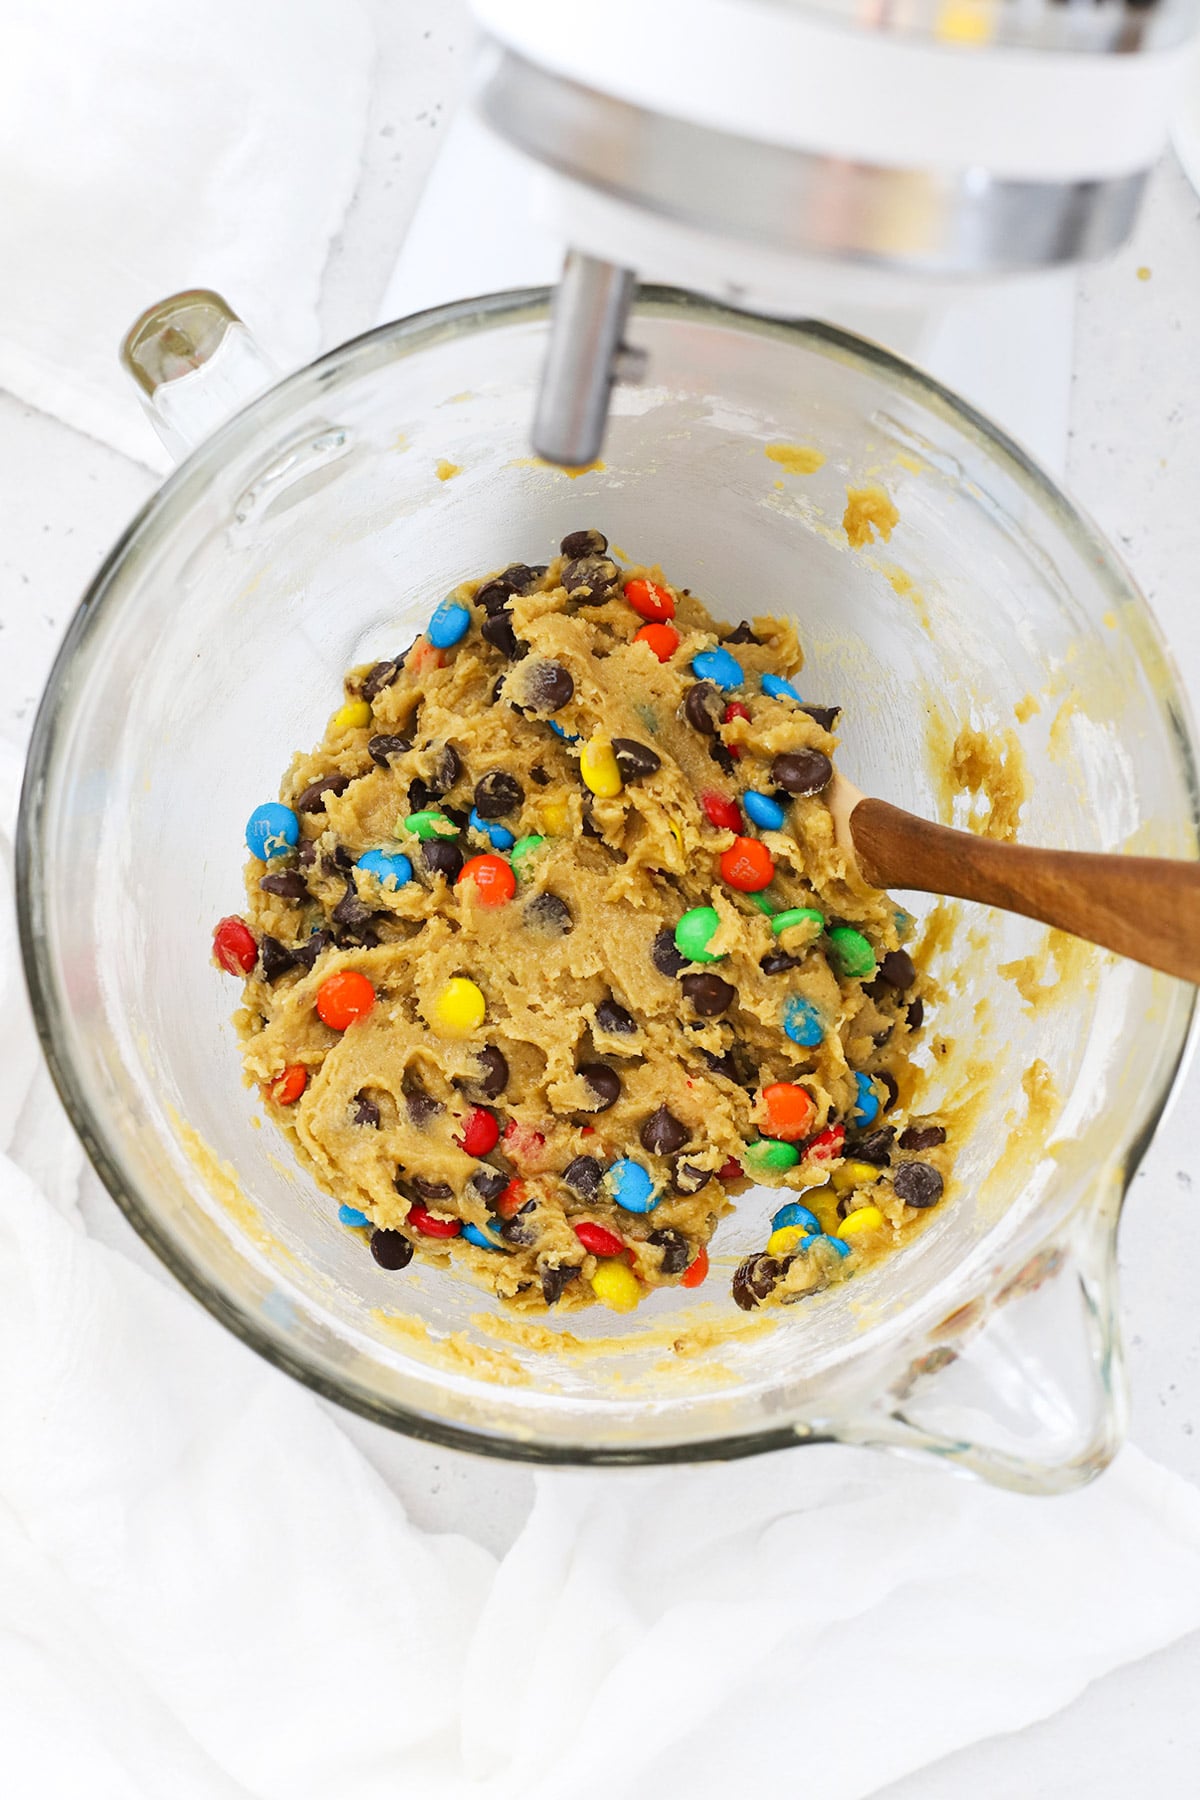 Adding M&Ms and chocolate chips to gluten-free m&m cookie dough